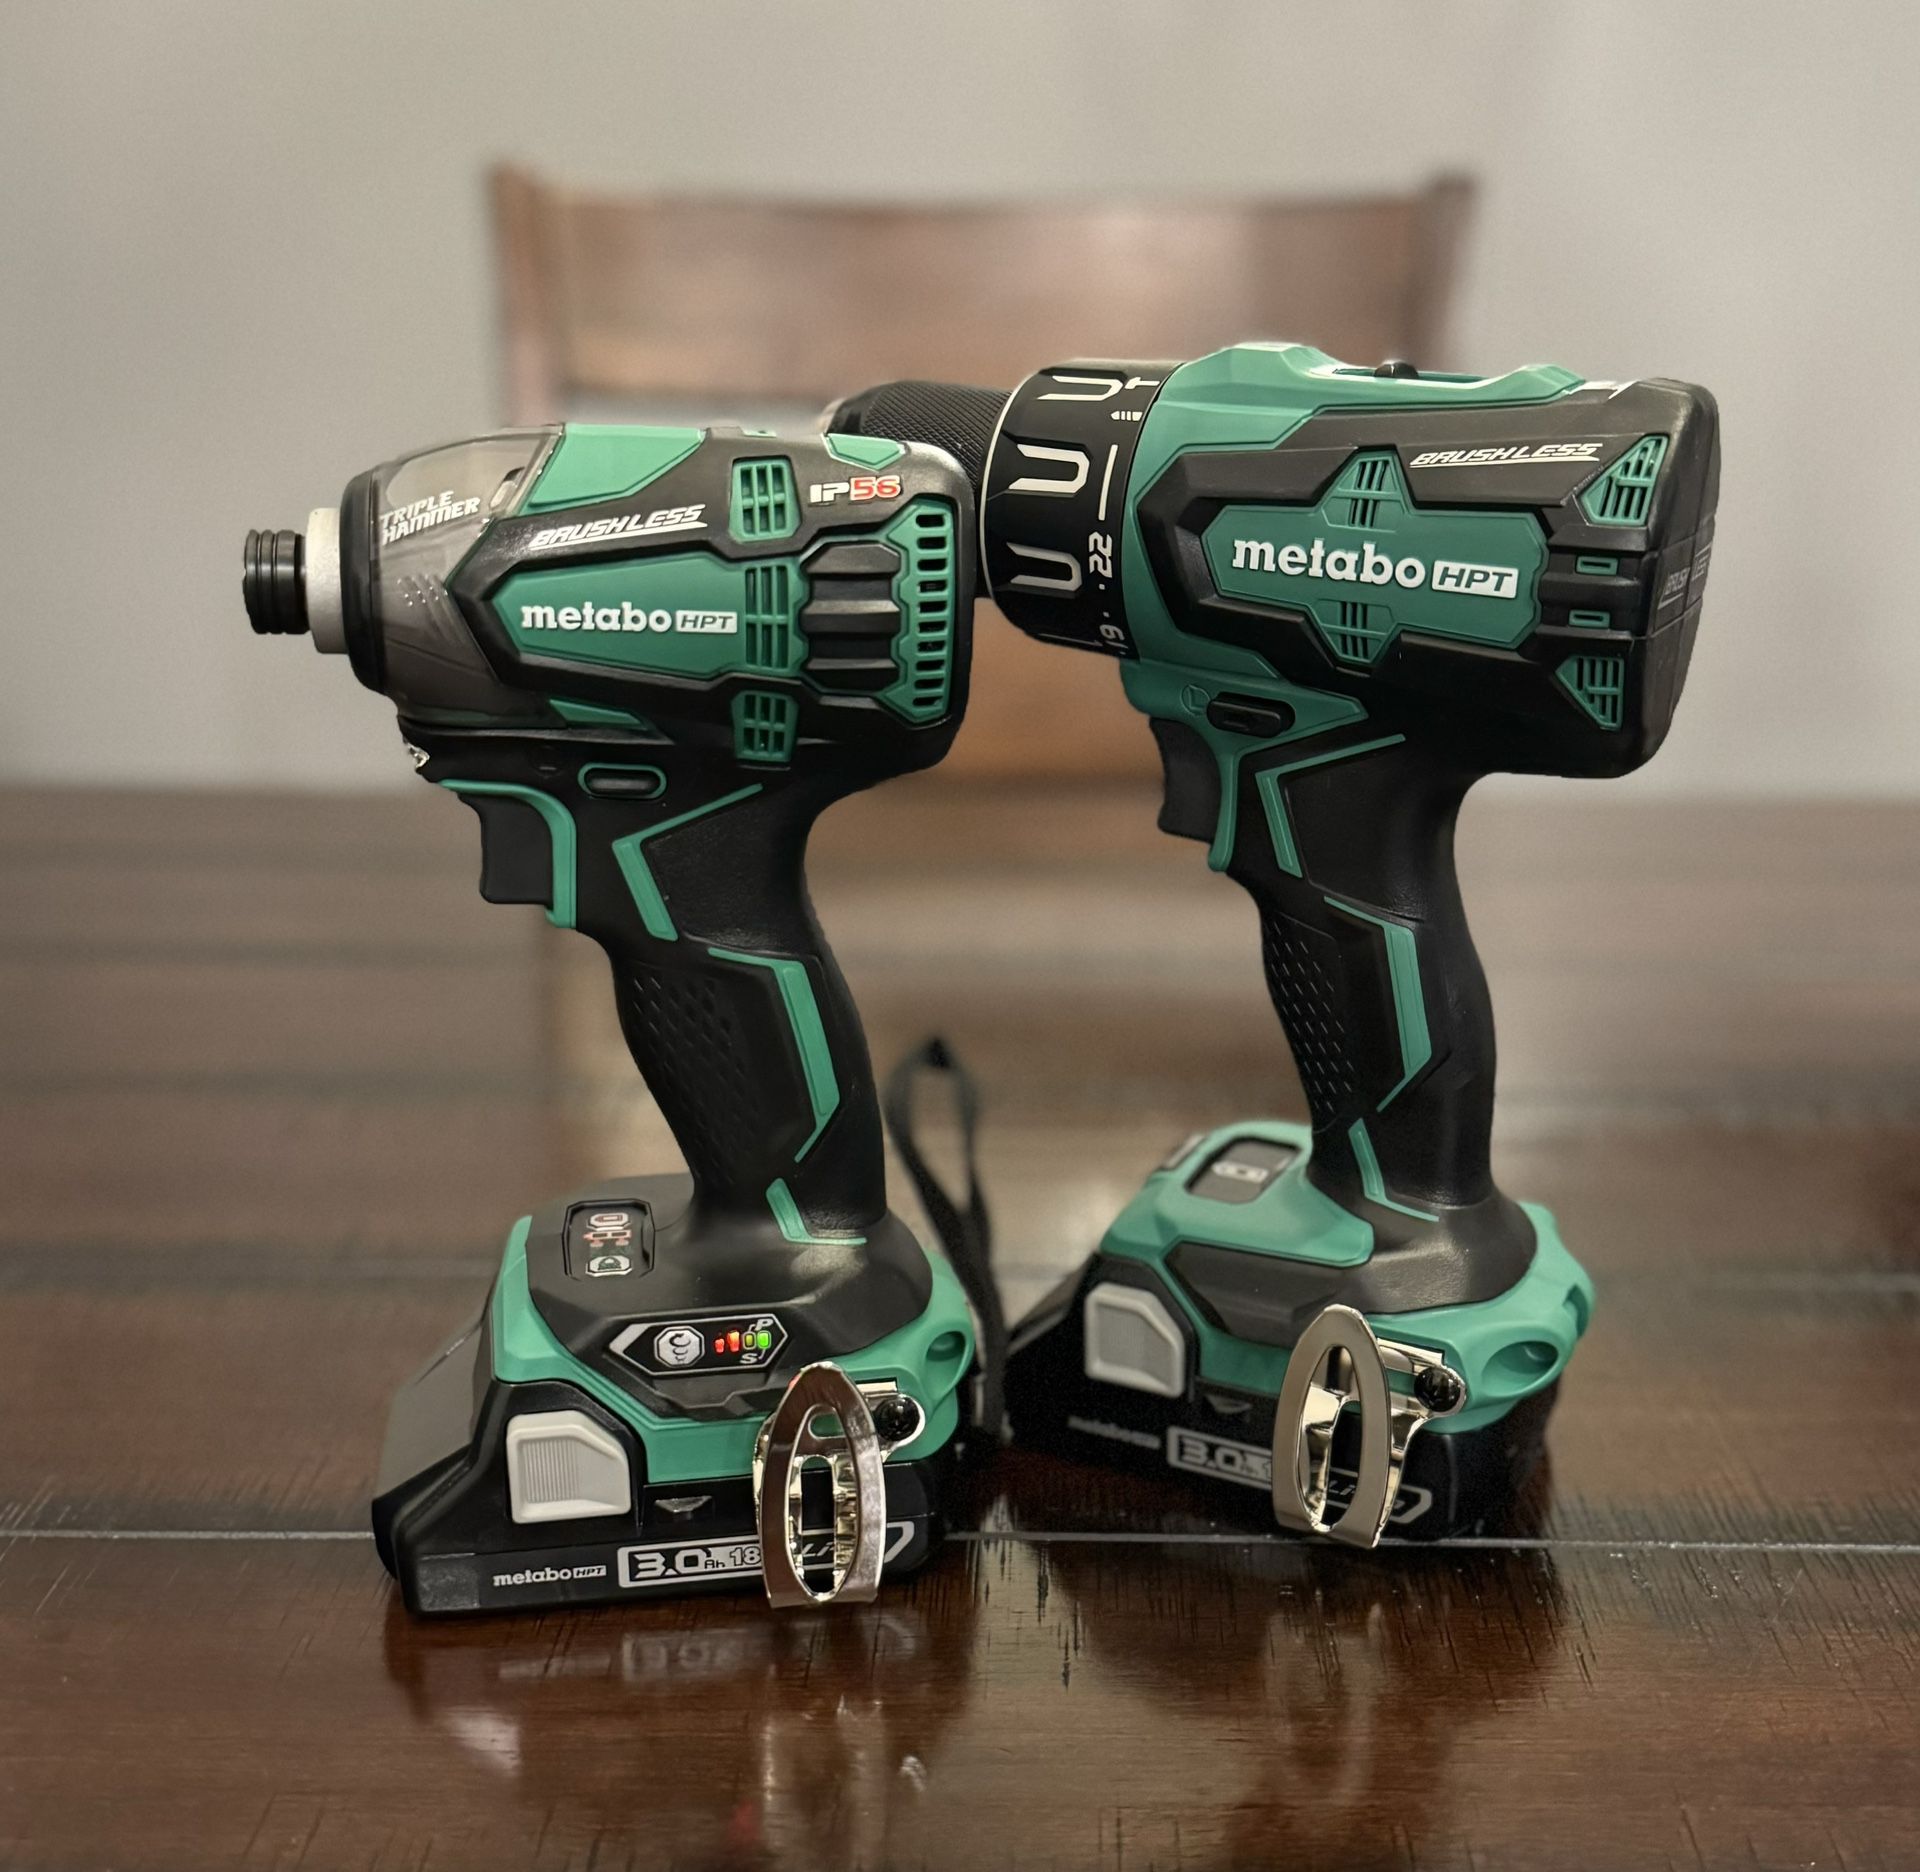 Metabo Brushless Drill And Impact